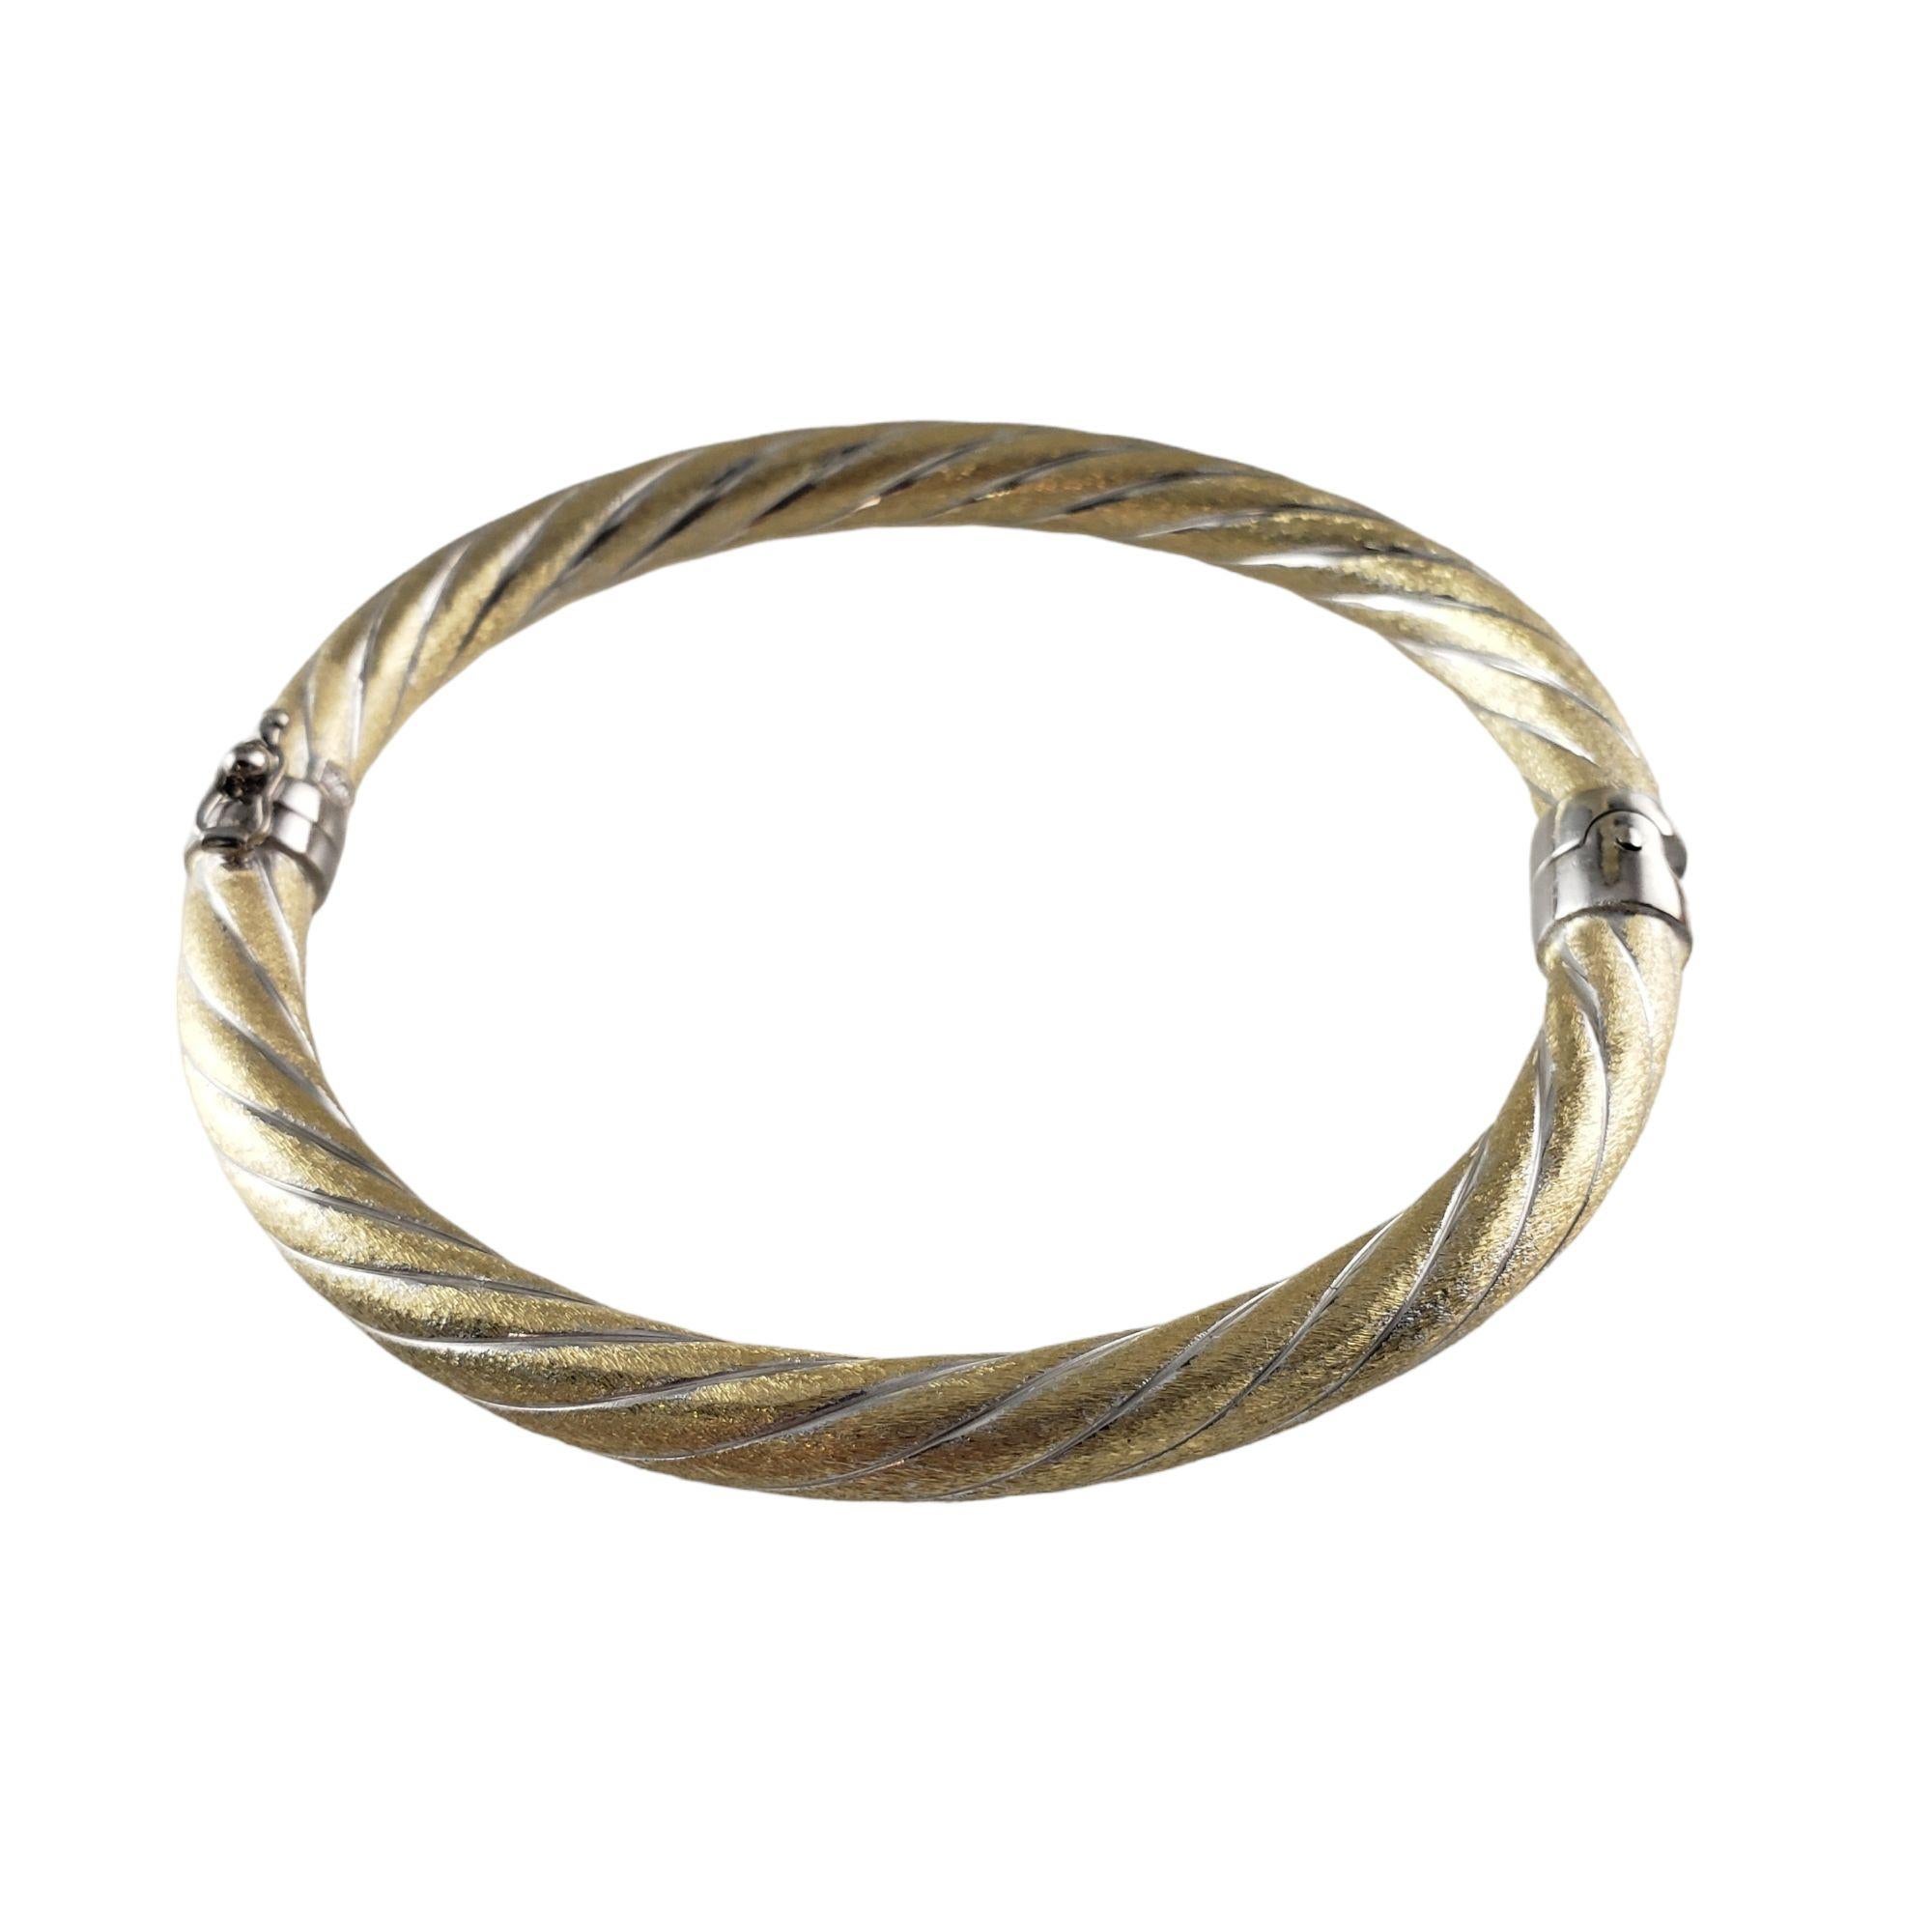 14 Karat Yellow Gold and White Bangle Bracelet

This elegant hinged bangle bracelet is crafted in meticulously detailed 14K yellow and white gold.  

Width:  6 mm.

Size:  7 inches

Weight:  10.8 gr./  6.9 dwt.

Stamped:  14K

Very good condition,